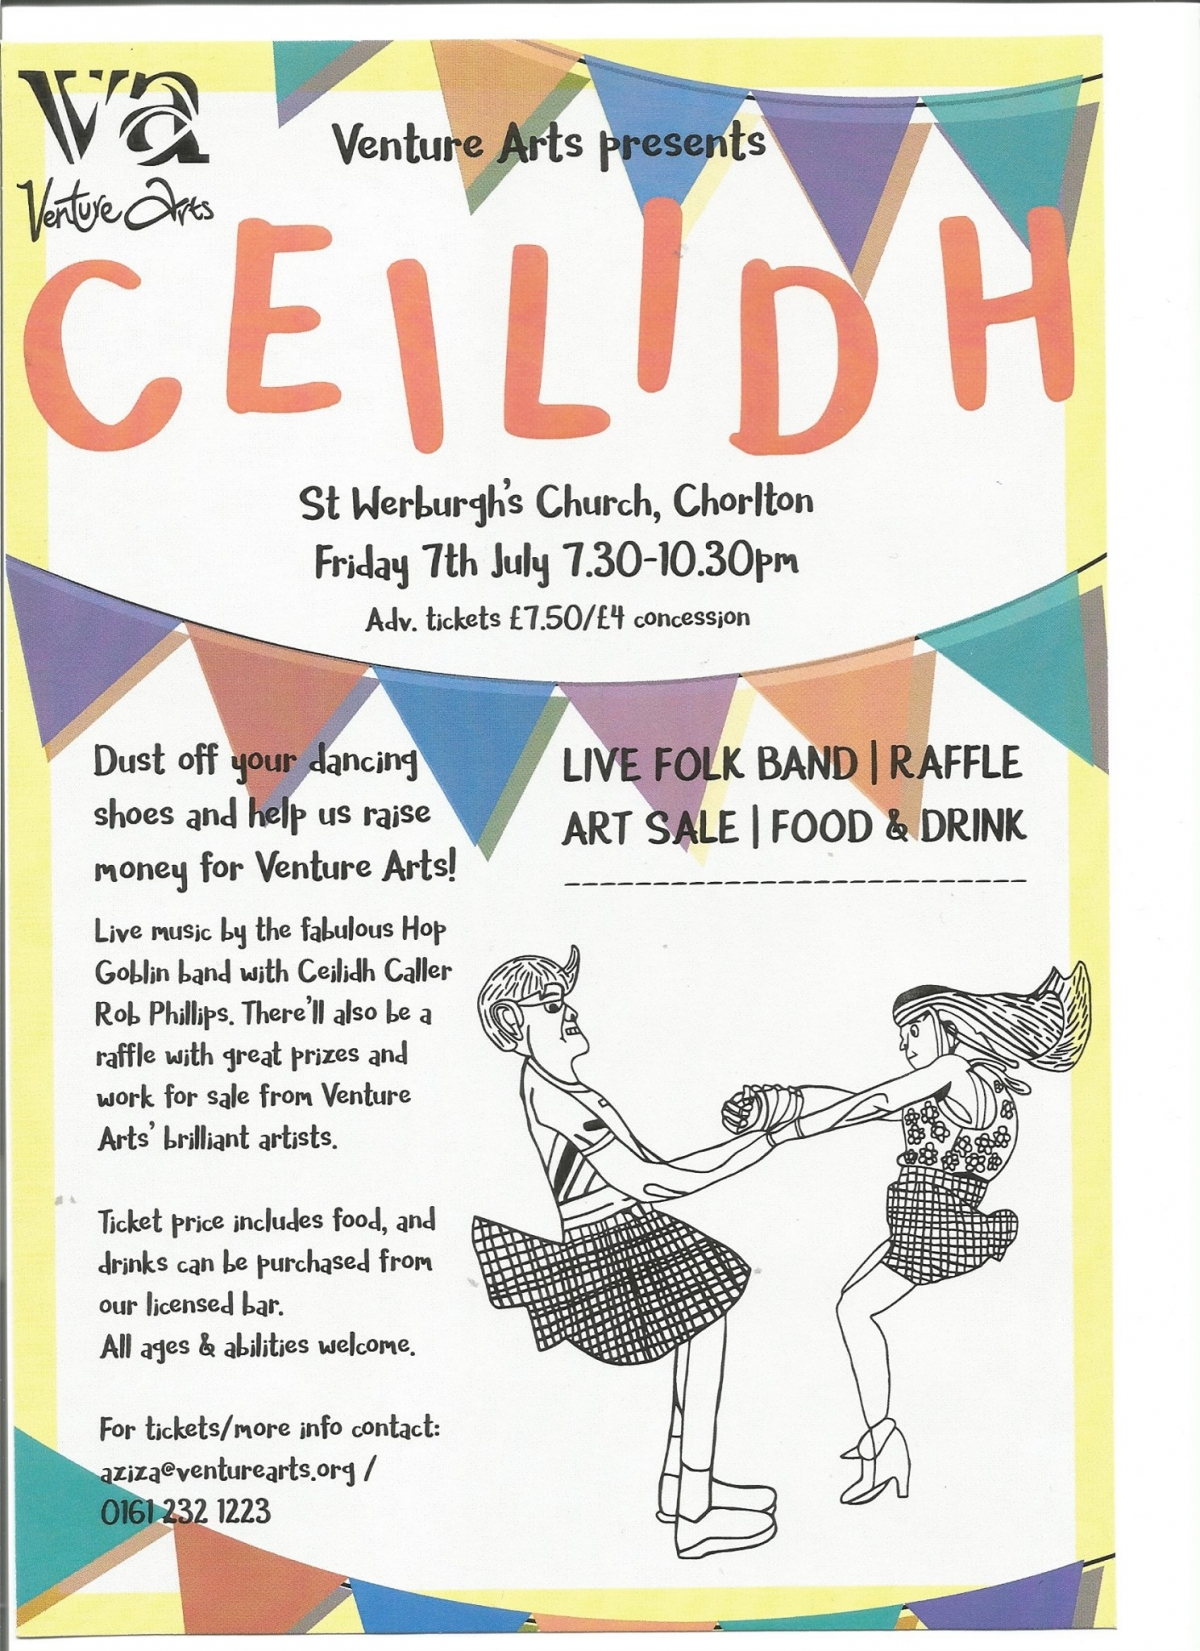 poster for Venture Arts' Ceilidh music and dance fundraiser